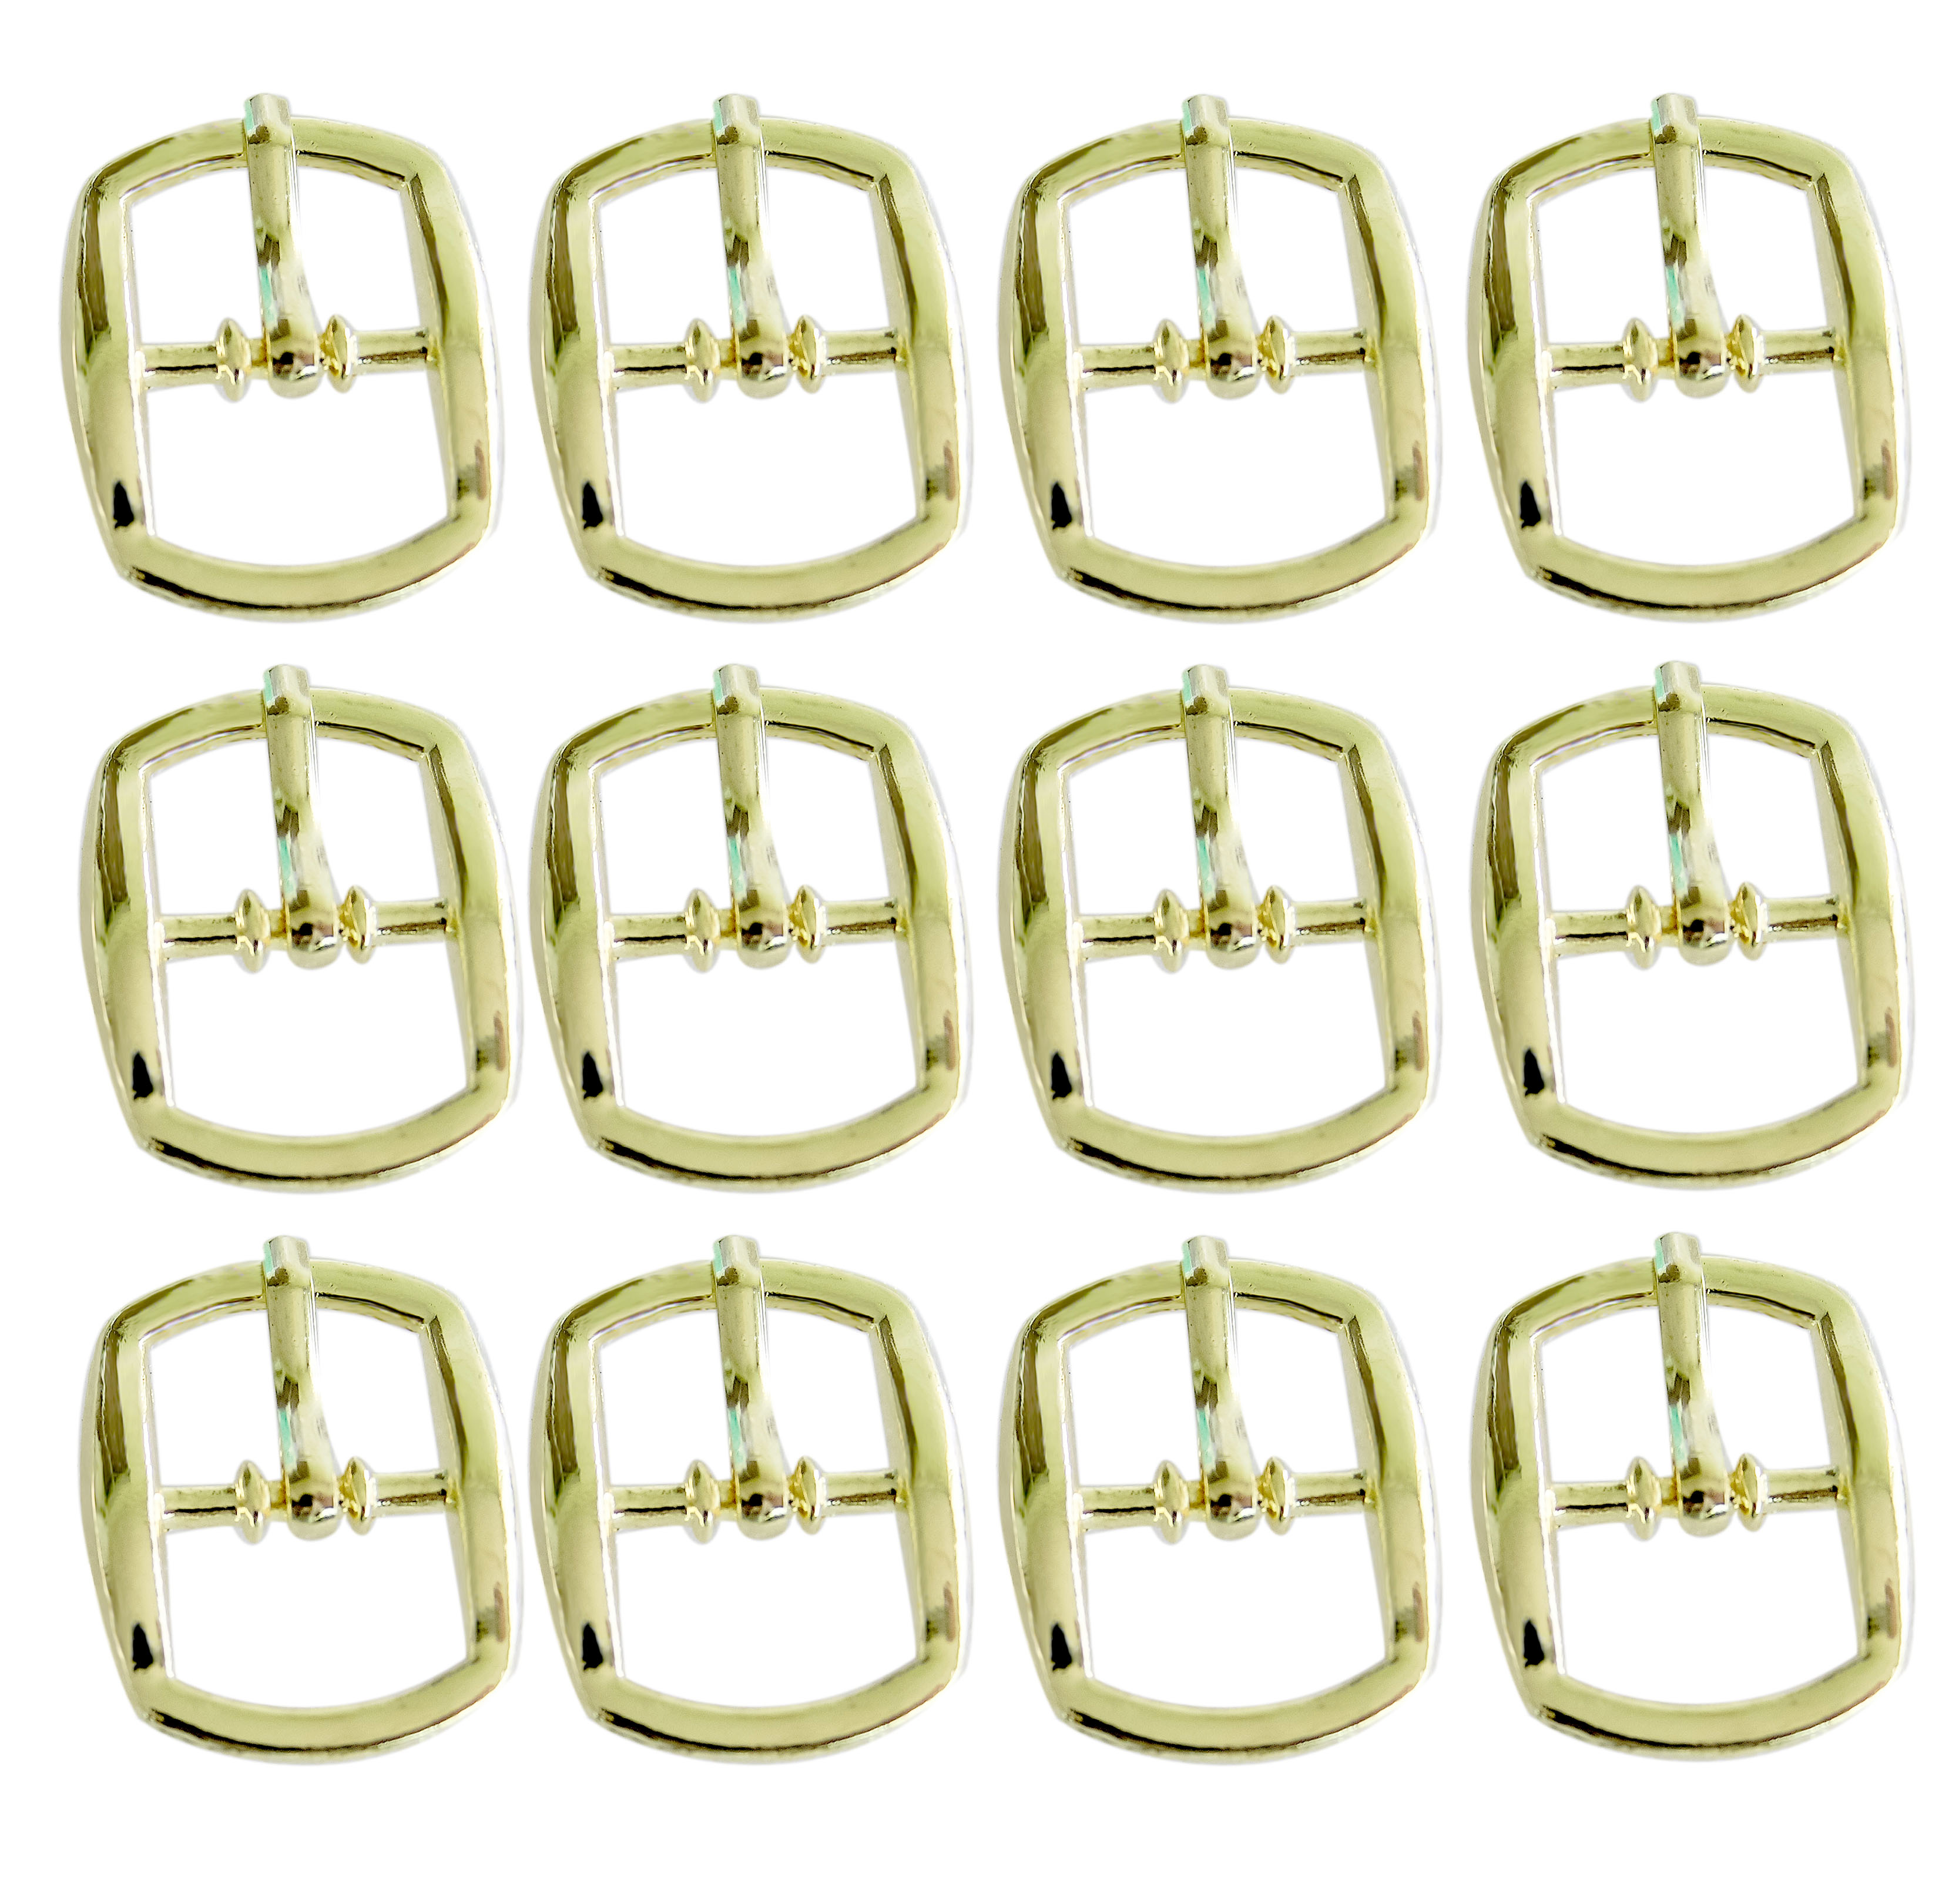 Plain Rounded Rectangle Shape Silver or Gold Buckles for 12mm straps 